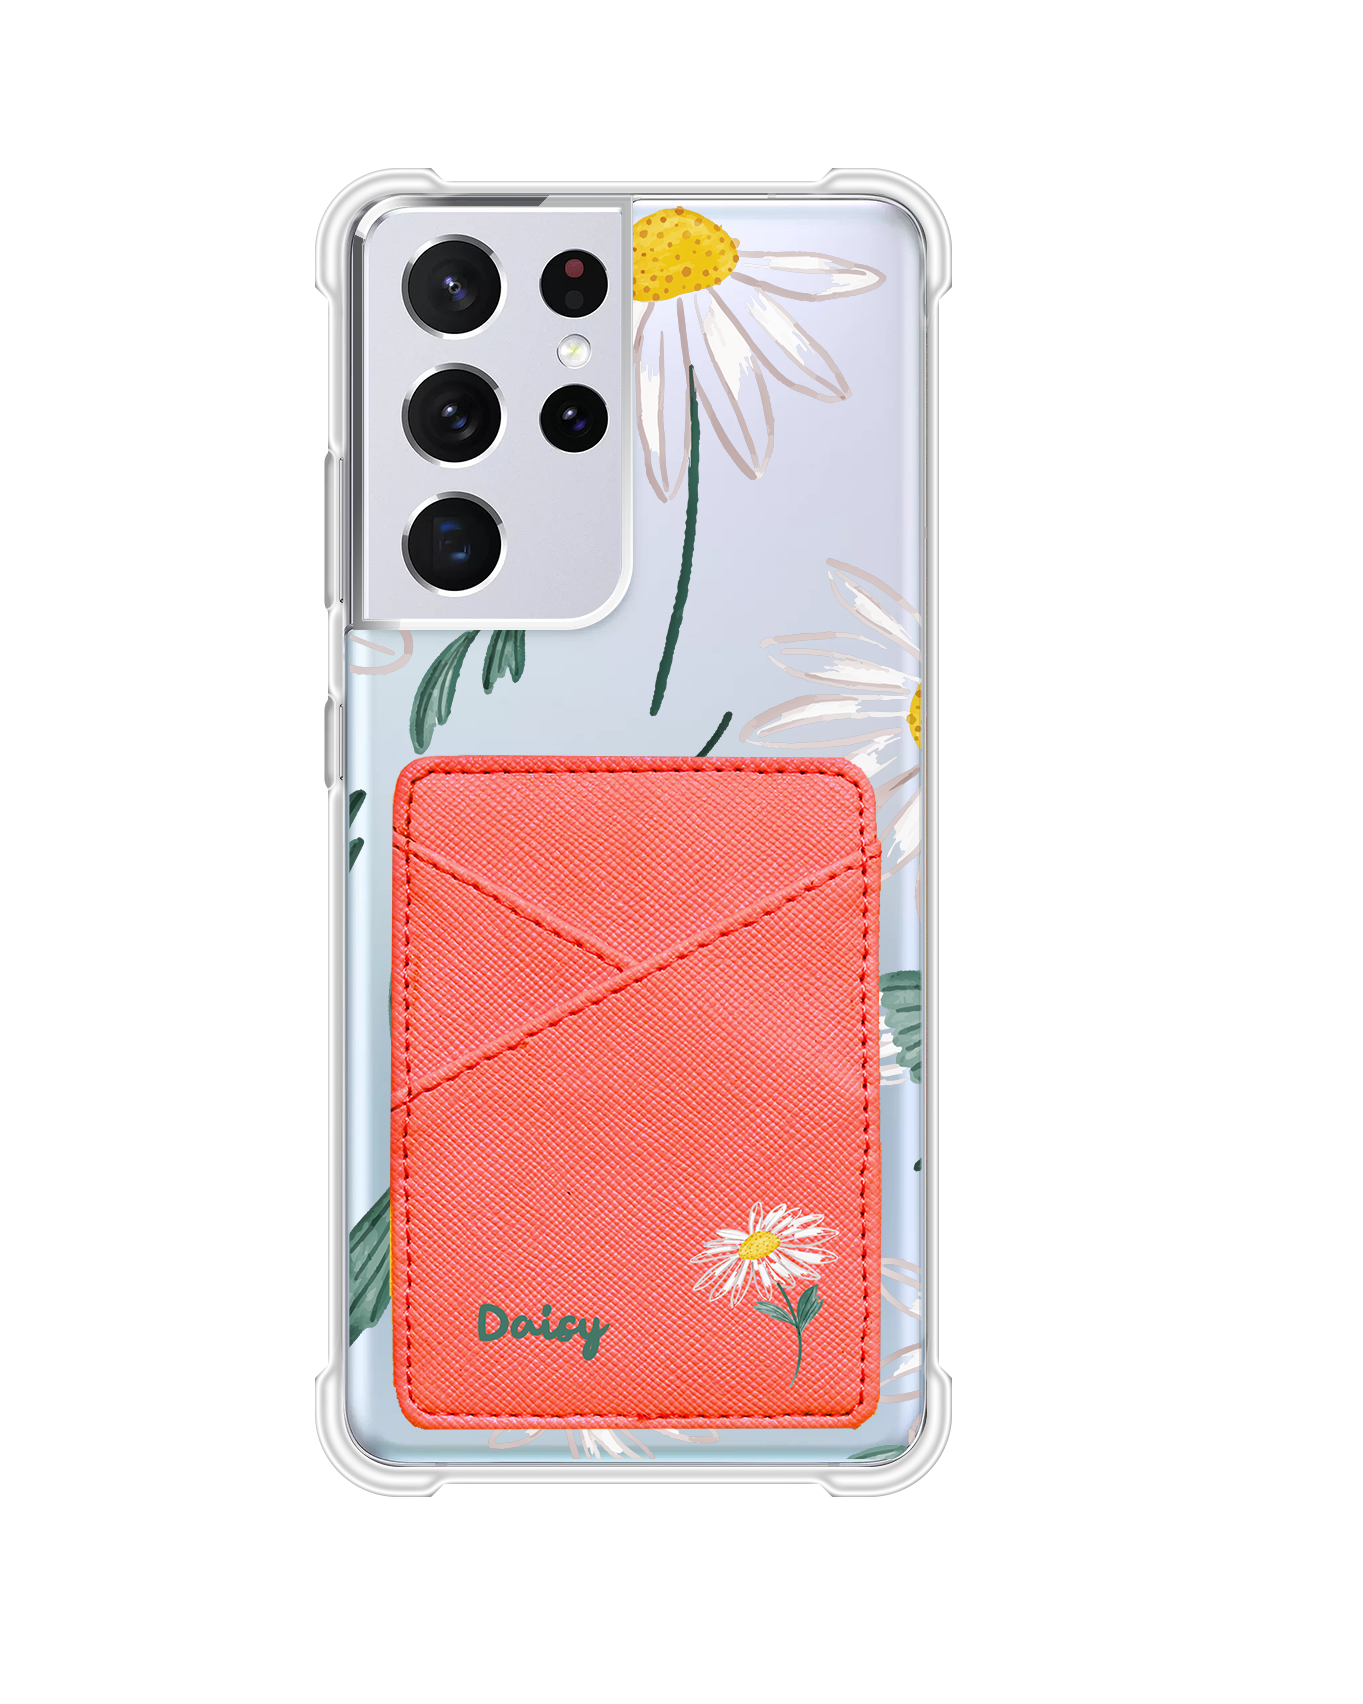 Android Phone Wallet Case - April Daisy 1.0